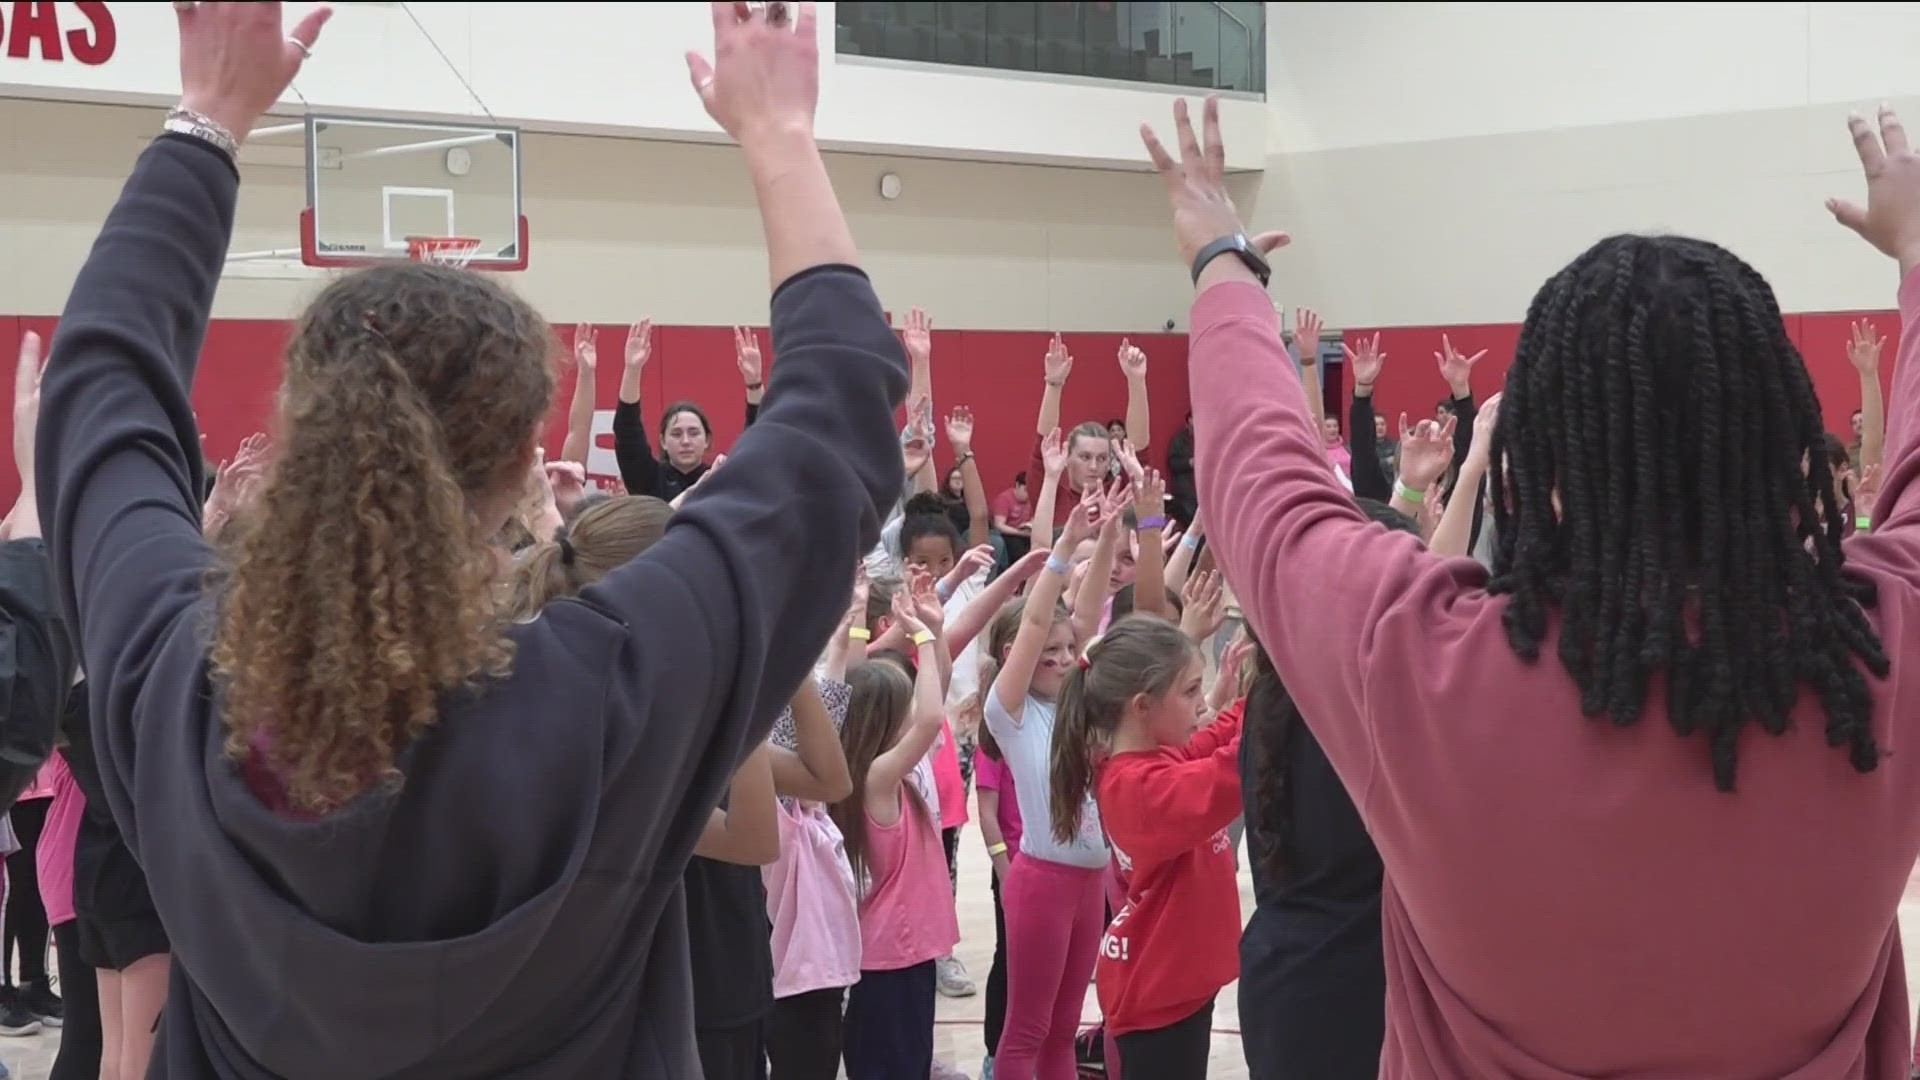 Razorback women athletes came together to host a clinic for young girls, ages 5 through 12, in honor of National Girls and Women in Sports Day.